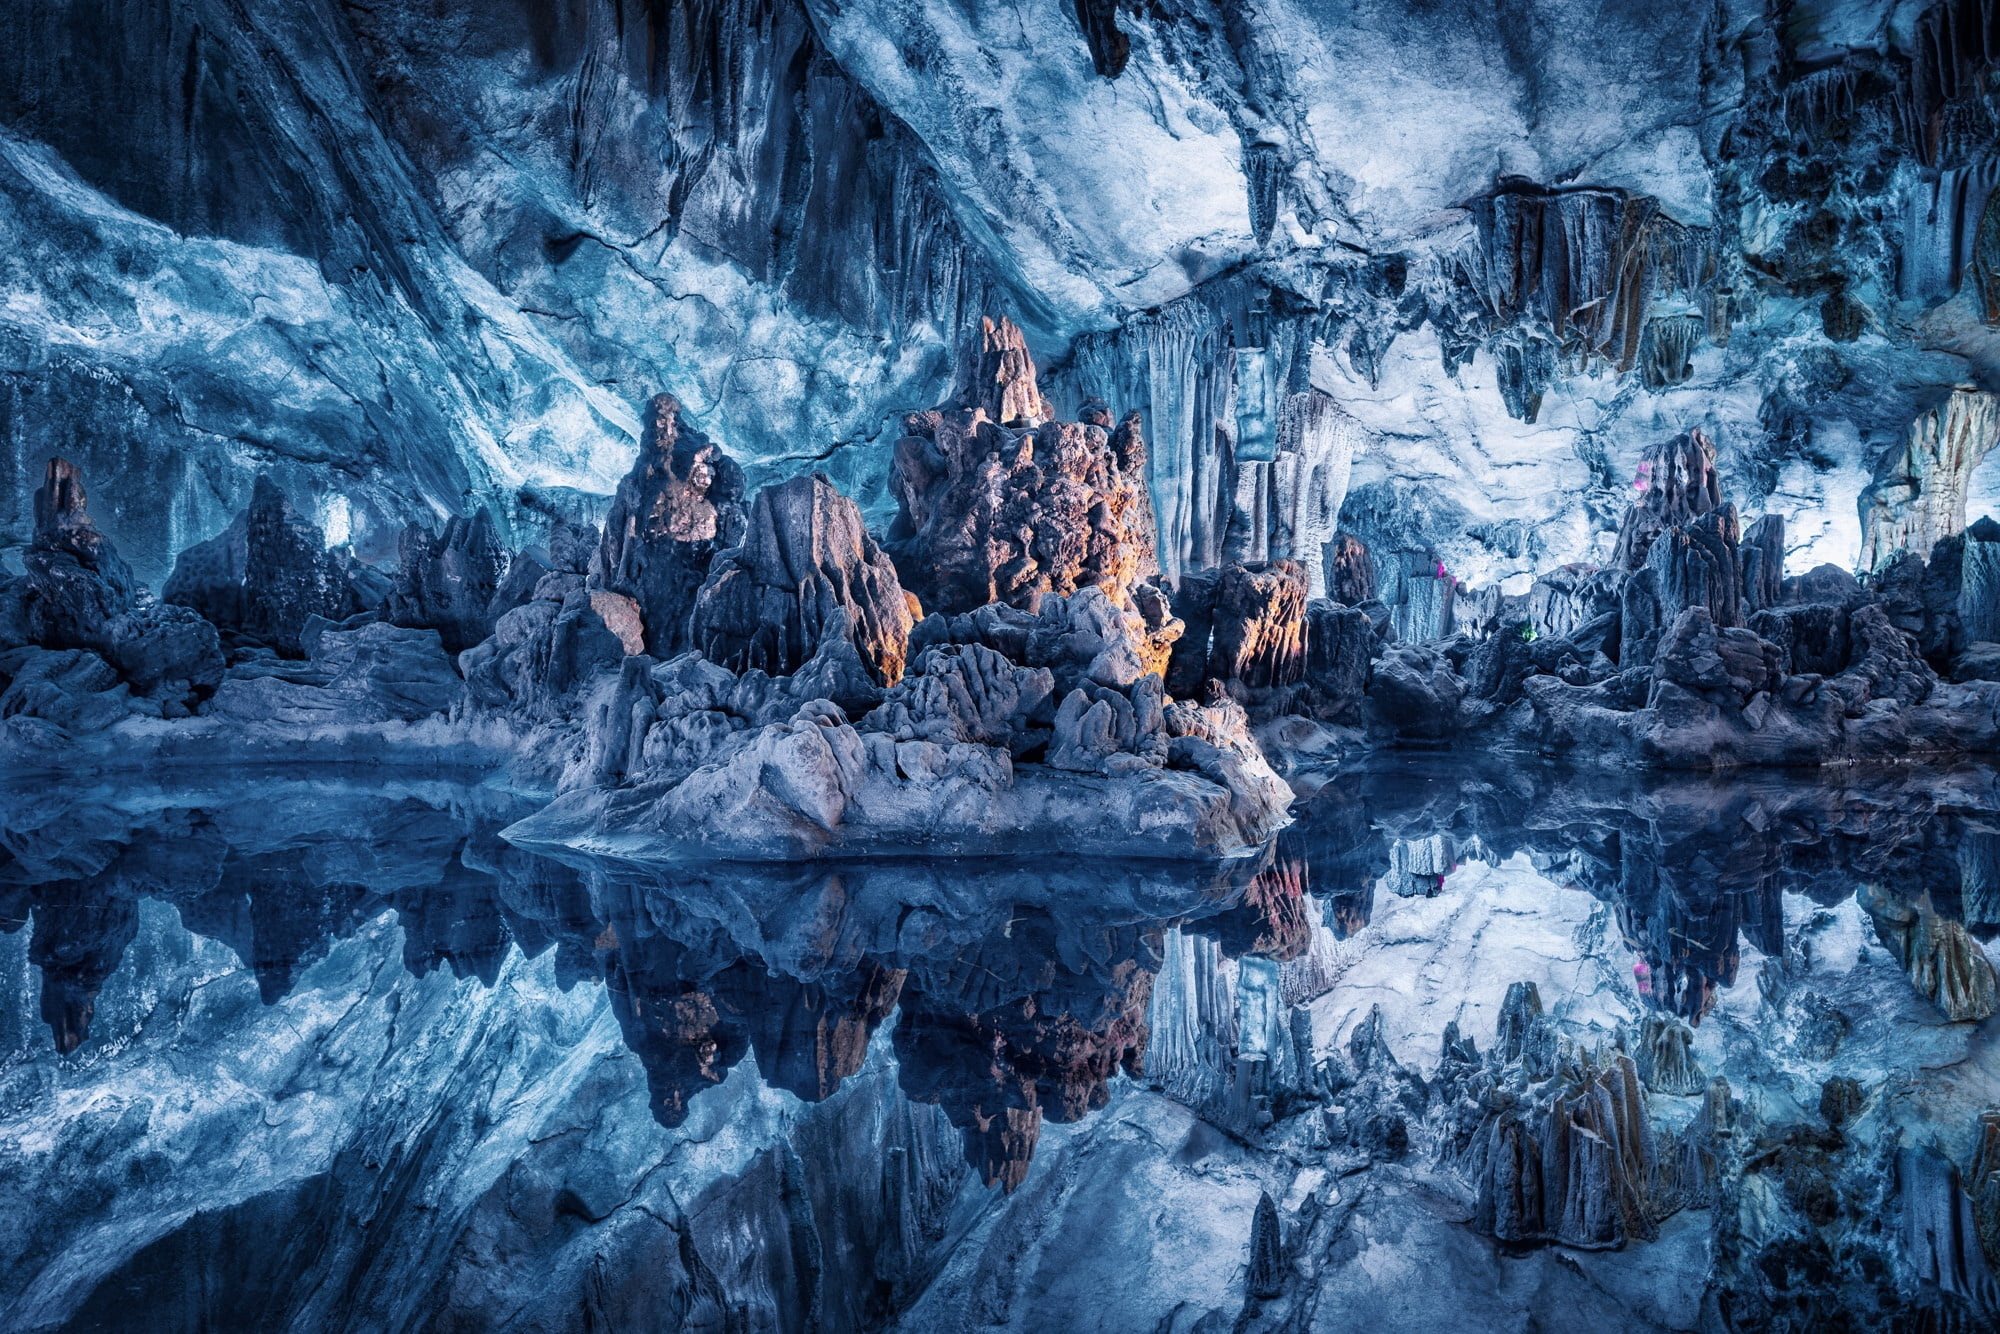 Black and gray ice caves, Dark metal tool, Crystal blue water, Nature's stunning contrast, 2000x1340 HD Desktop